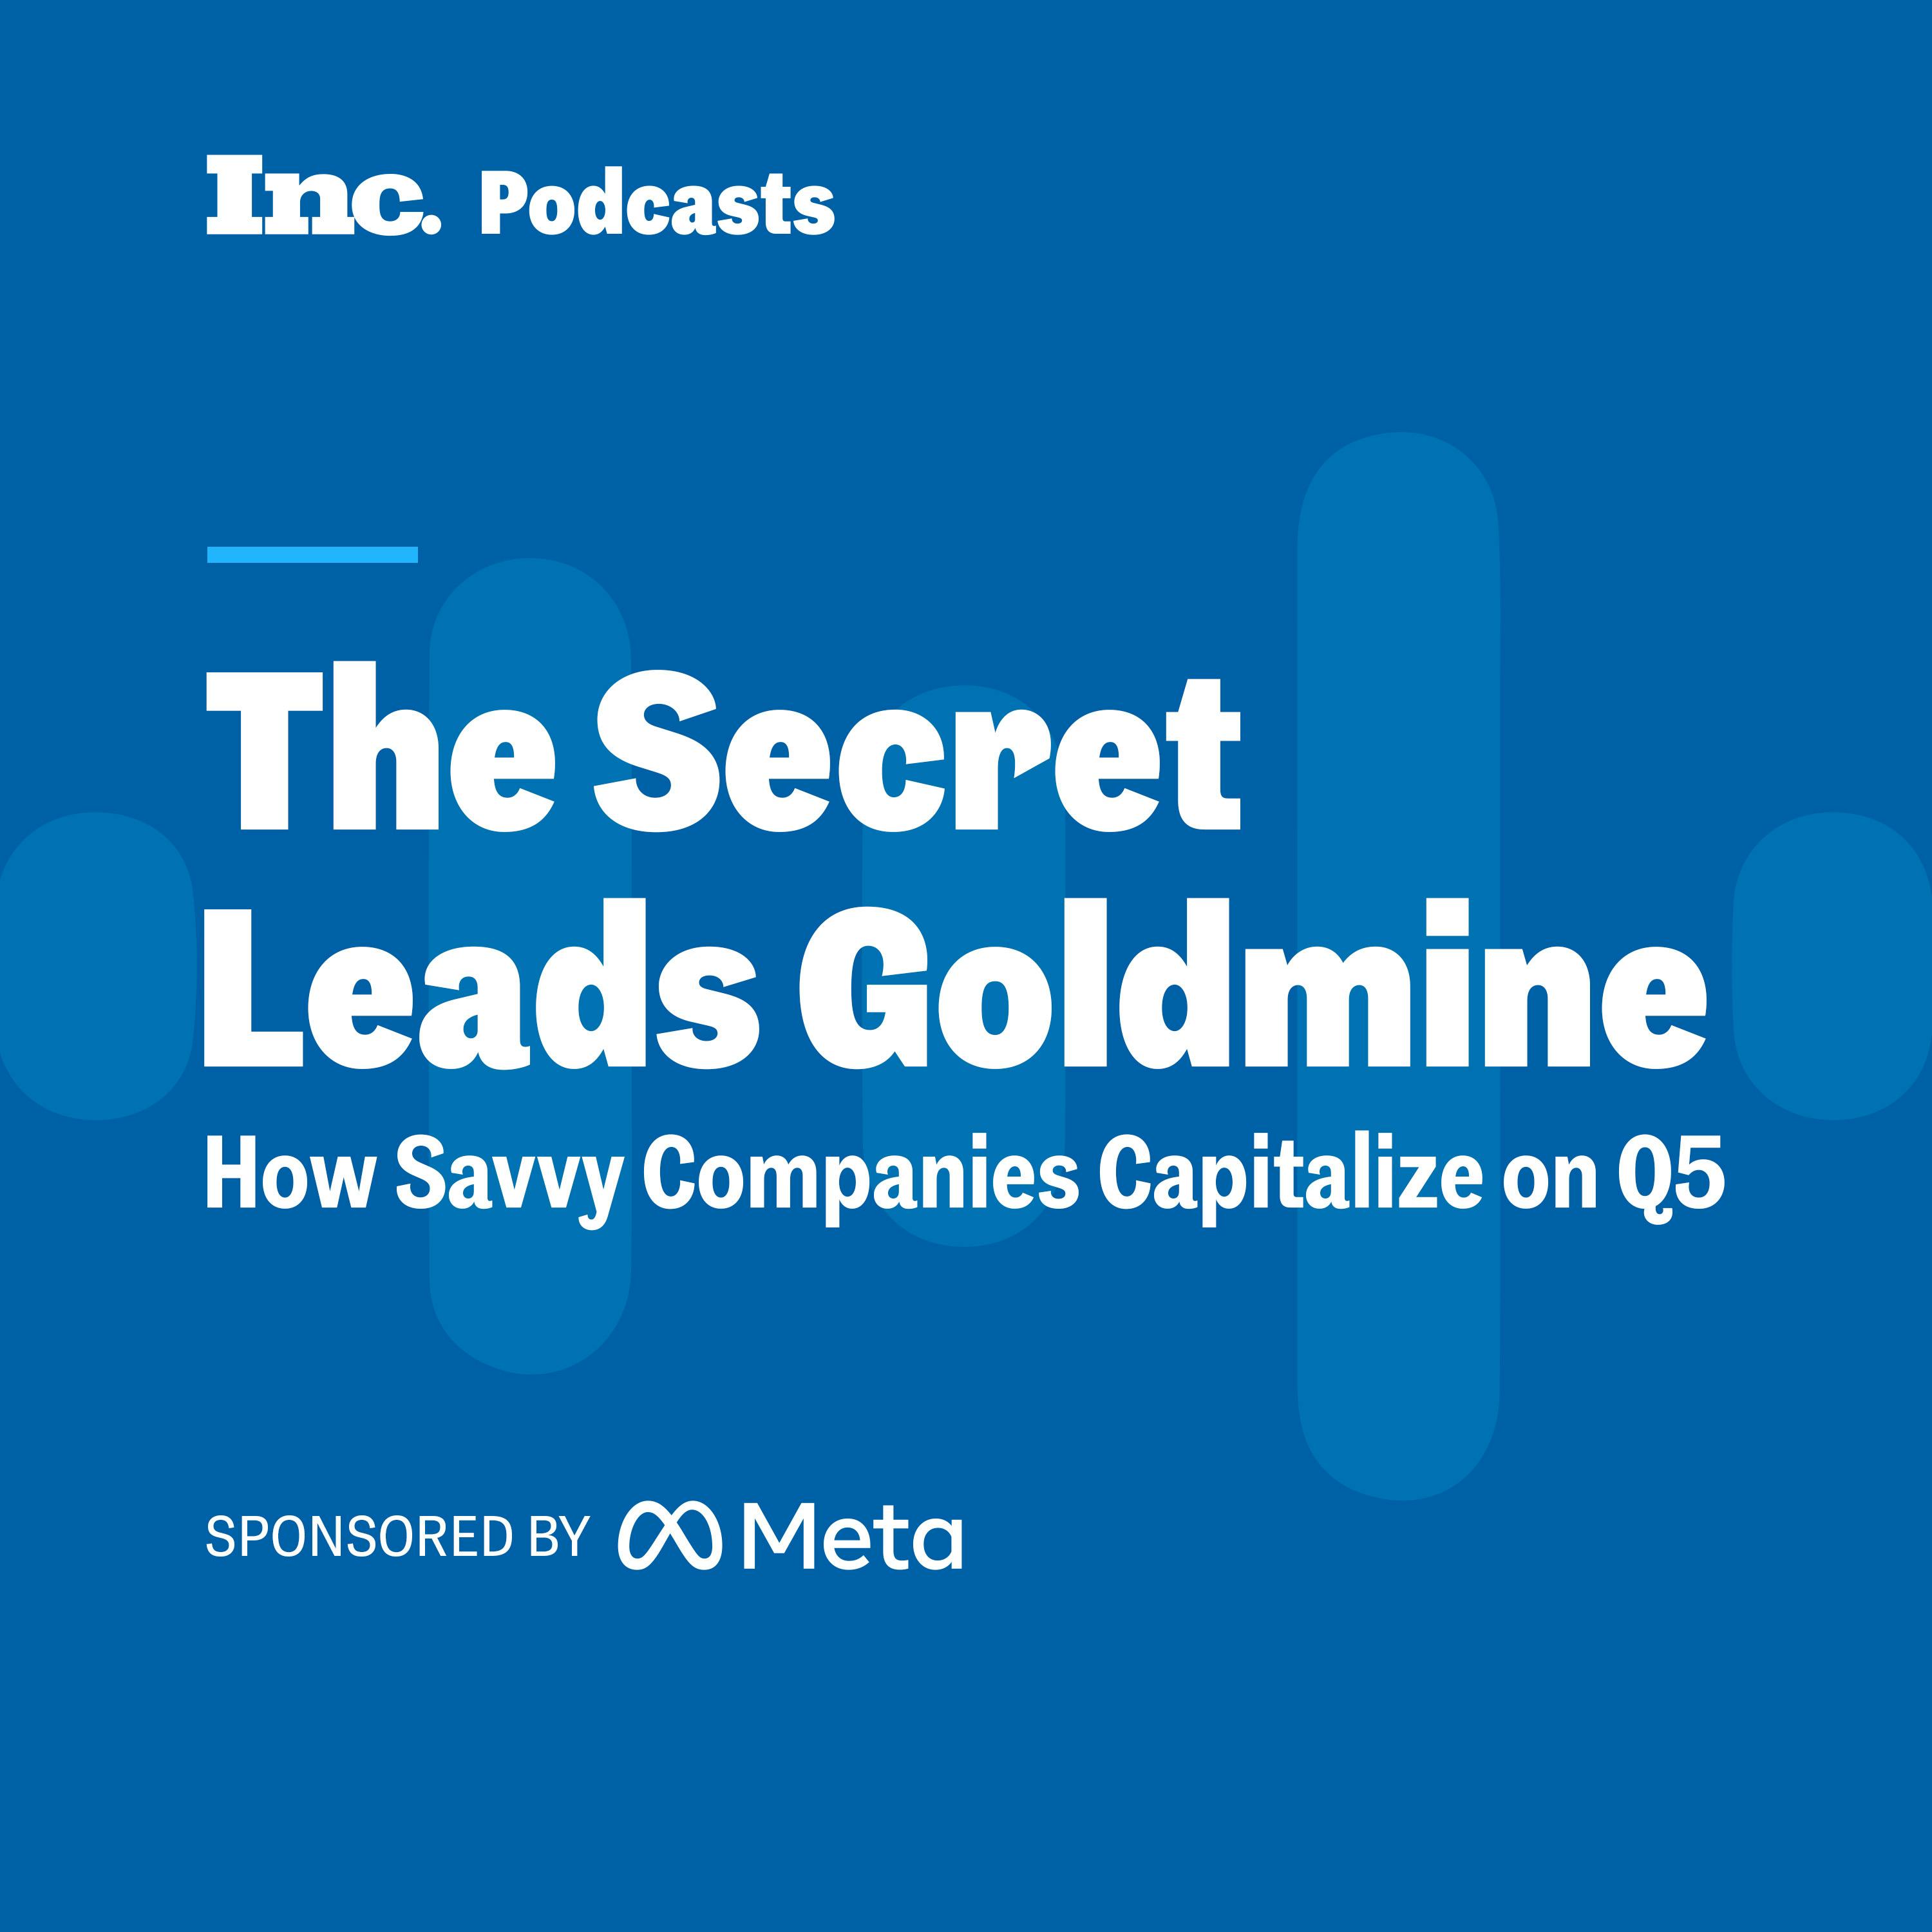 FROM INC STUDIO AND META - The Secret Leads Goldmine: How Savvy Companies Capitalize on Q5